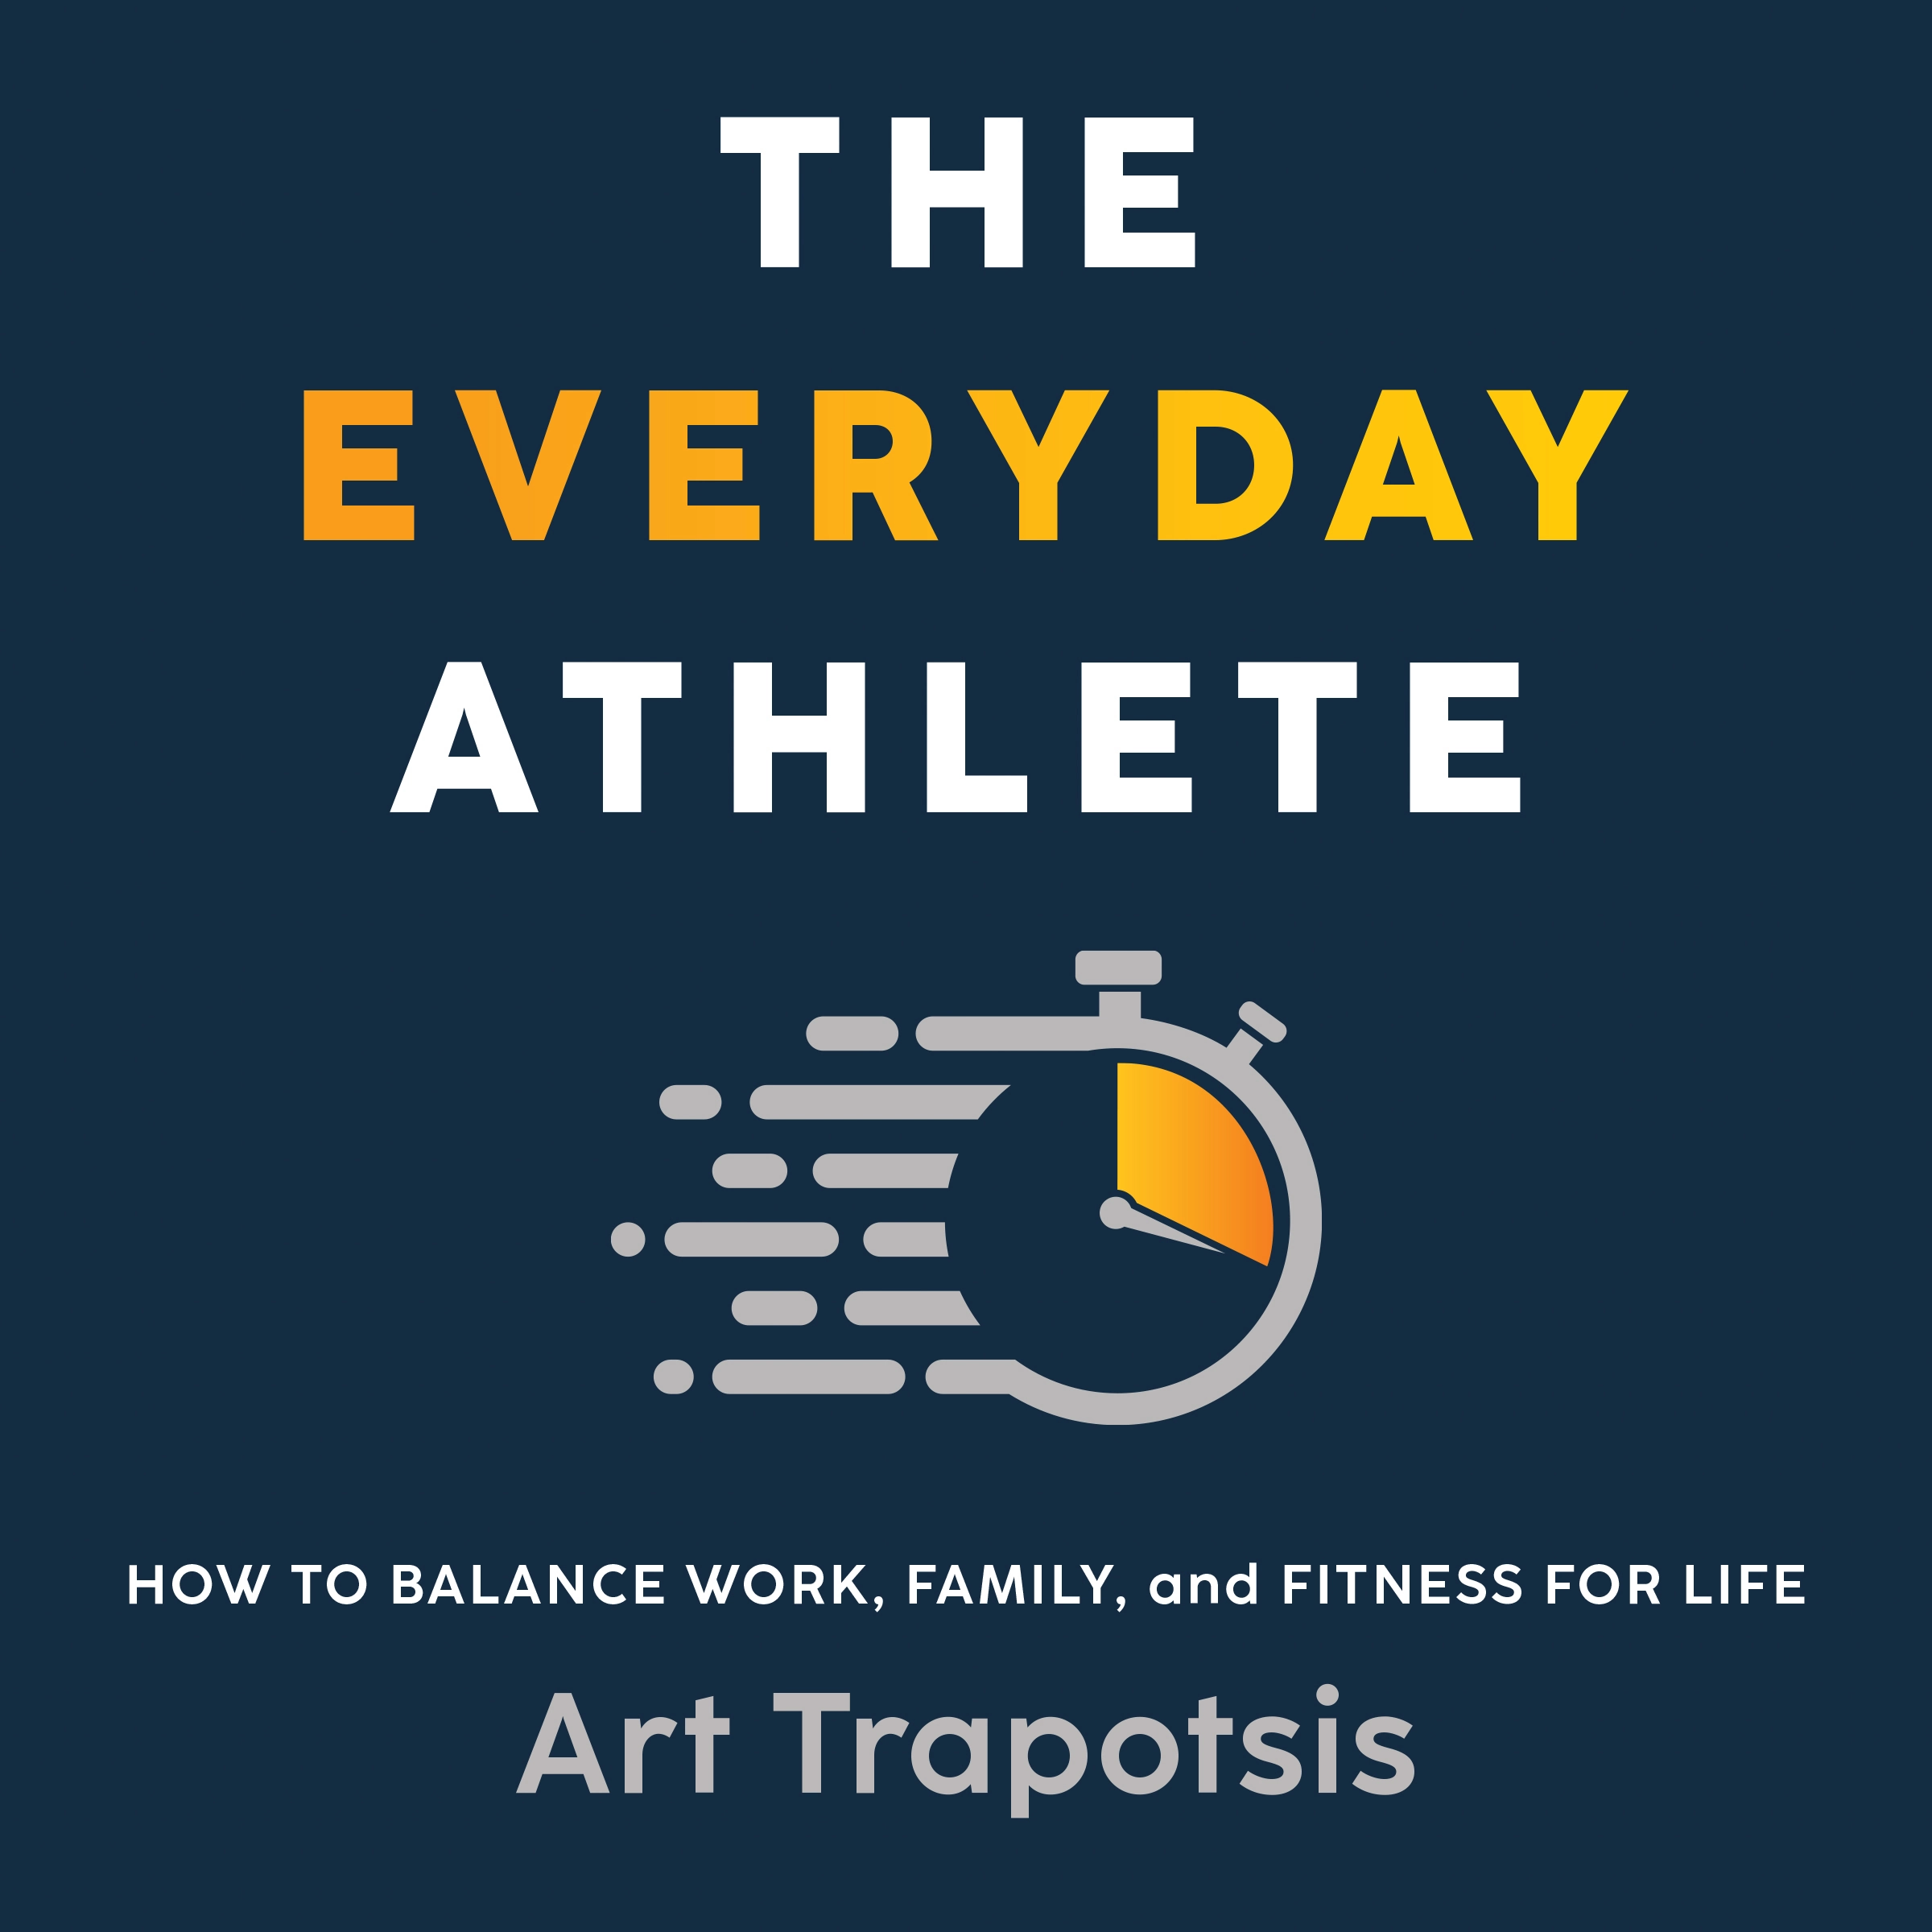 The Everyday Athlete Audiobook by Art Trapotsis